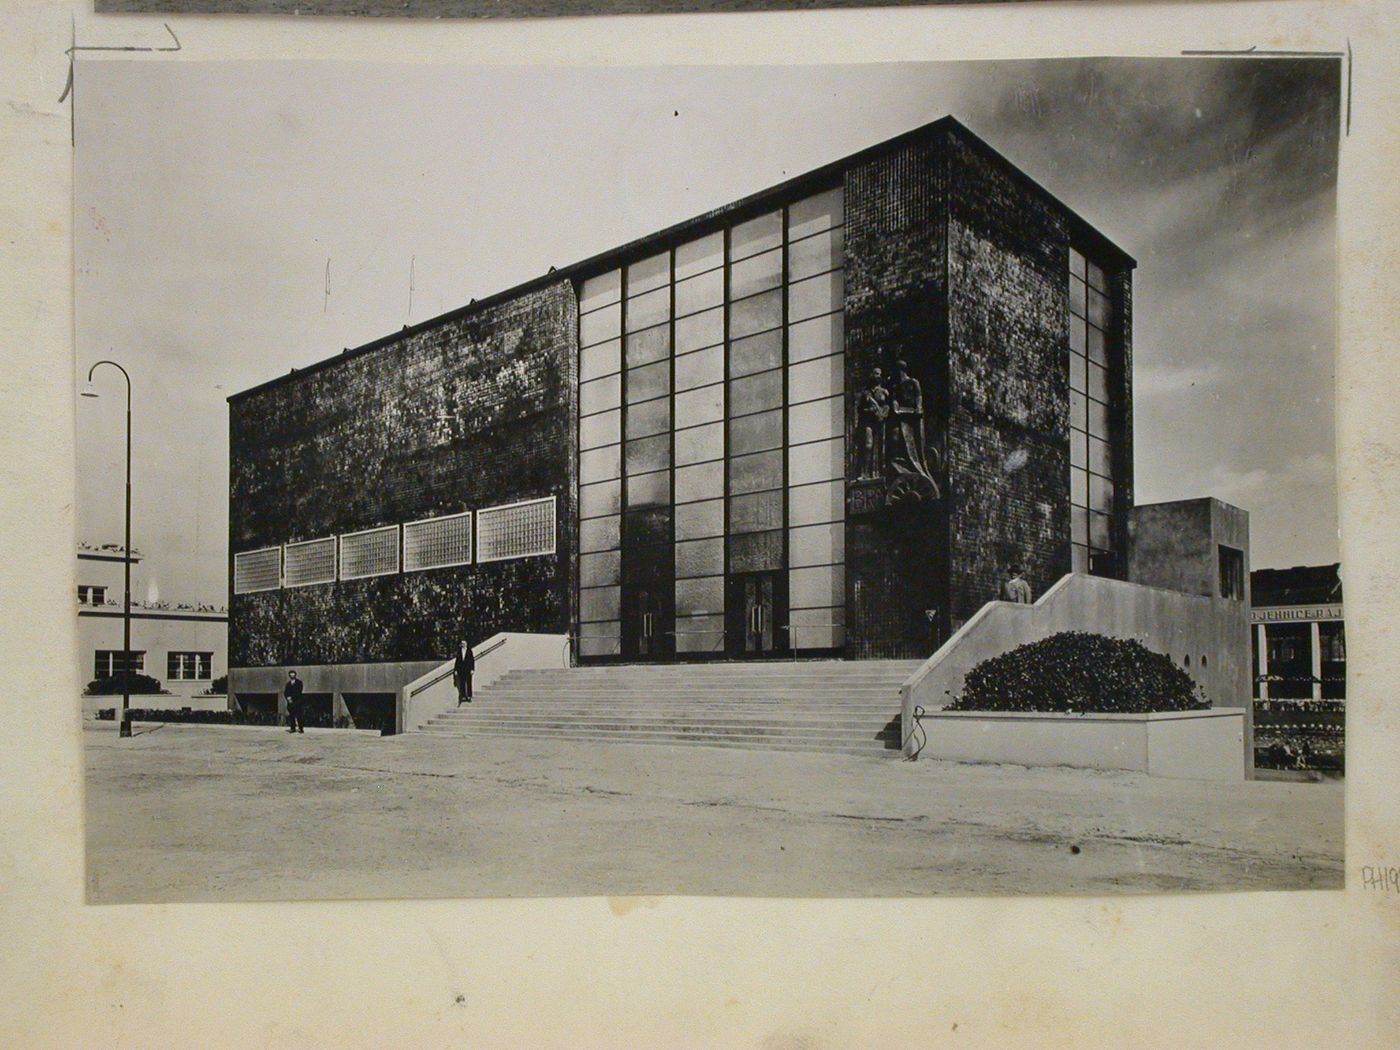 View of the exhibition pavilion of the city of Brno, Czechoslovakia (now Czech Republic)